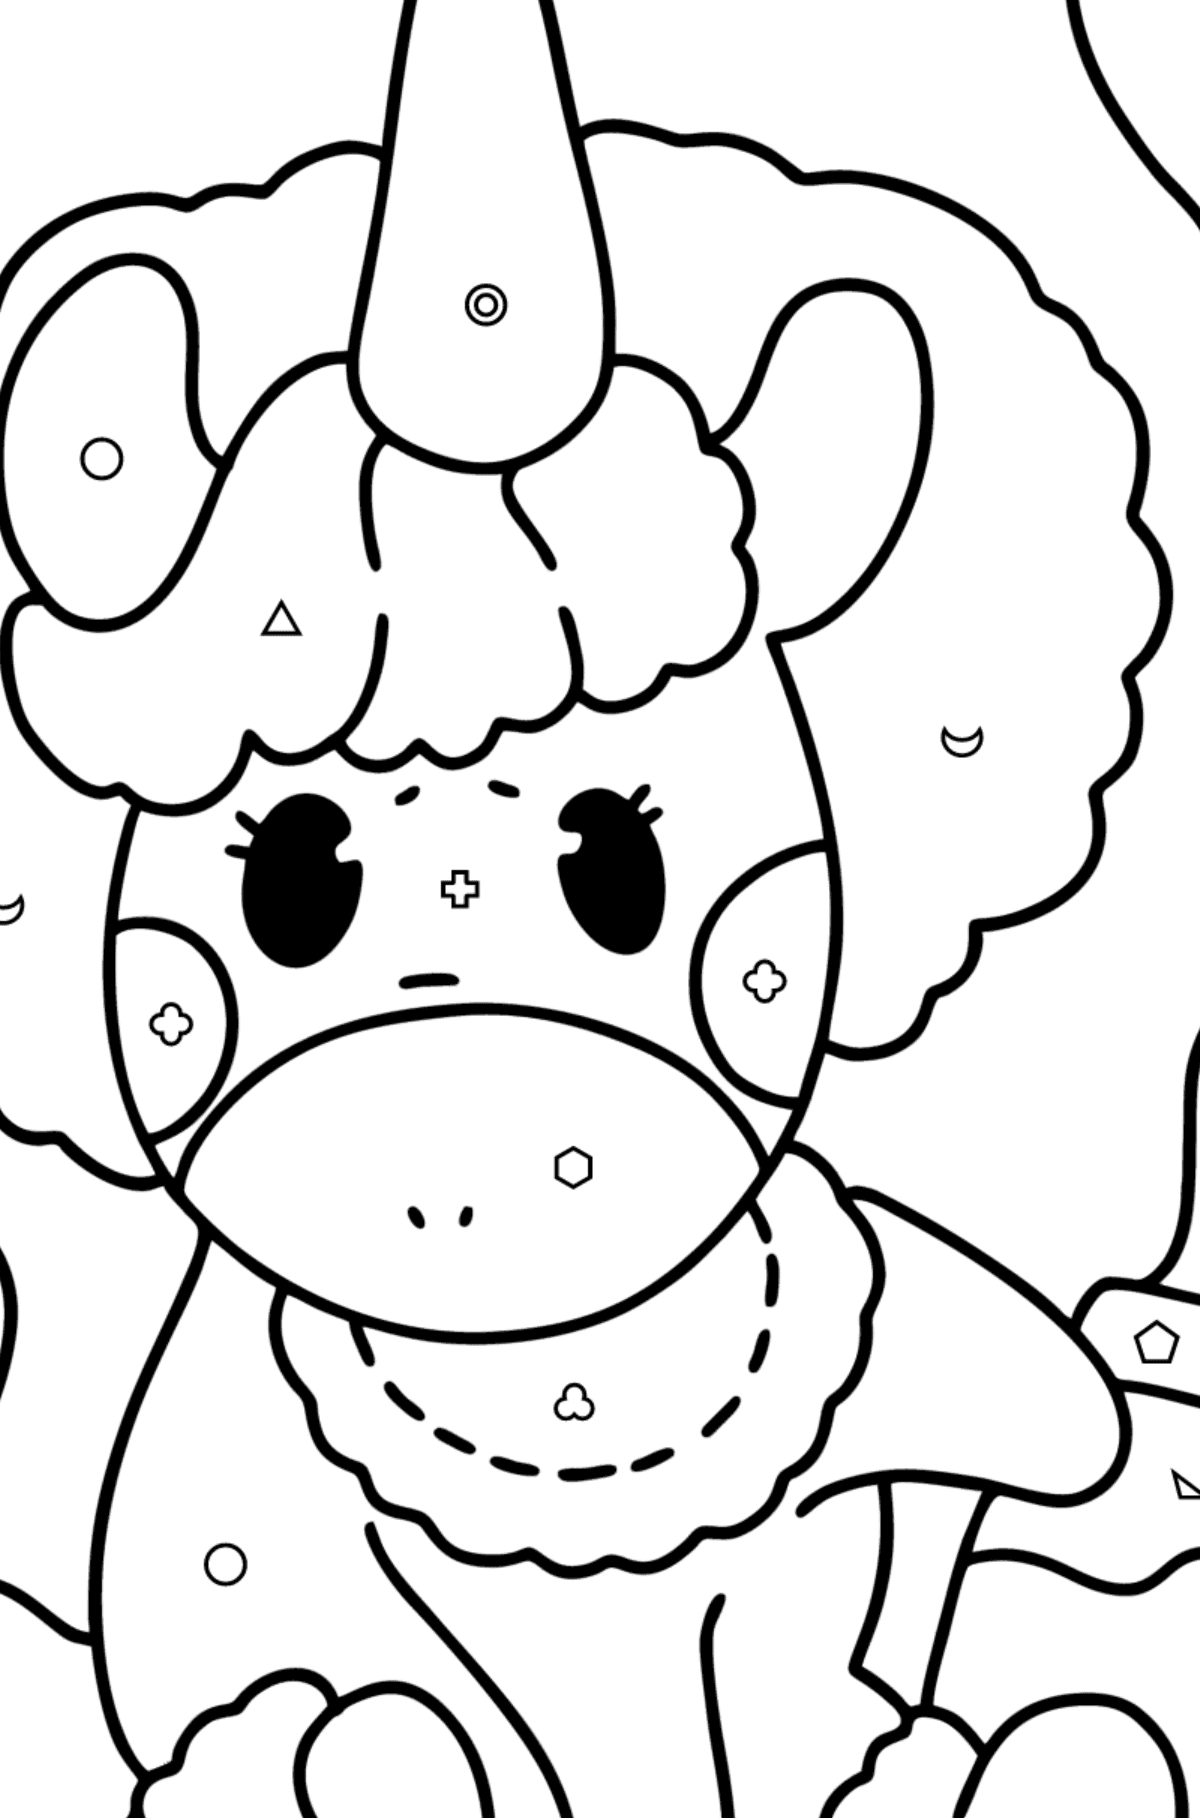 Unicorn kid coloring page - Coloring by Geometric Shapes for Kids